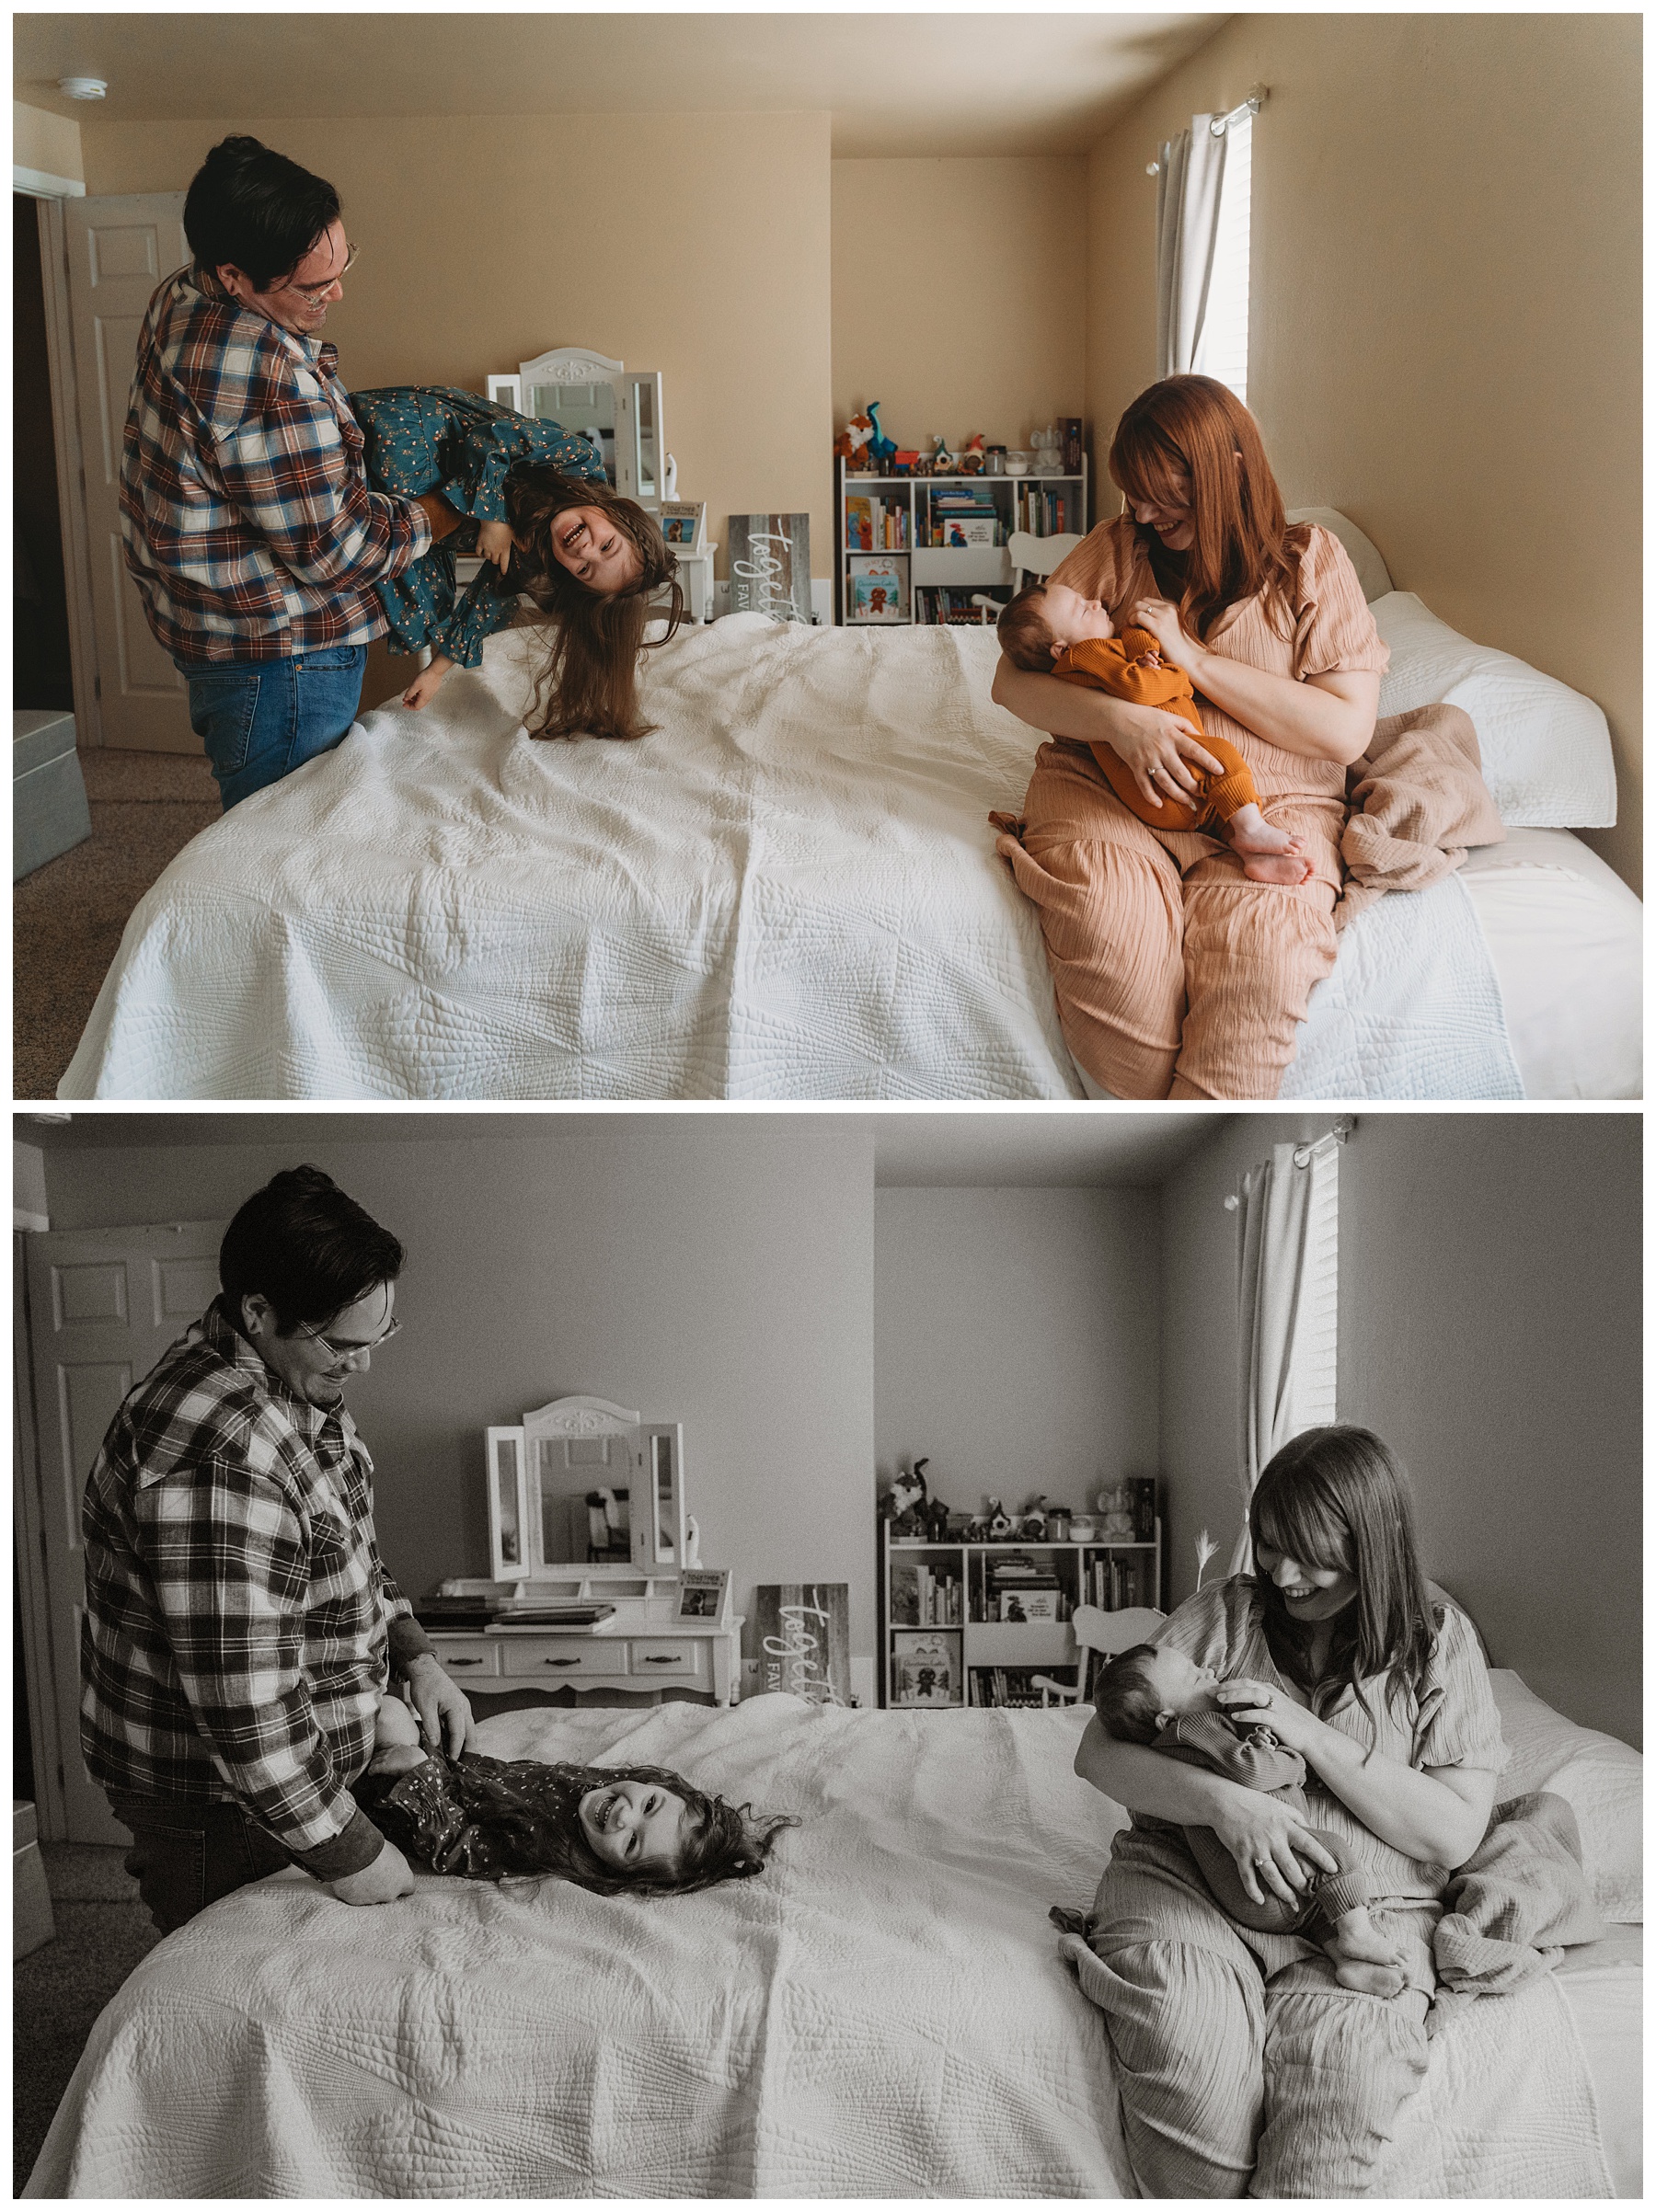 Family playing on bed during rainy day family session at home in Olympia, Washington